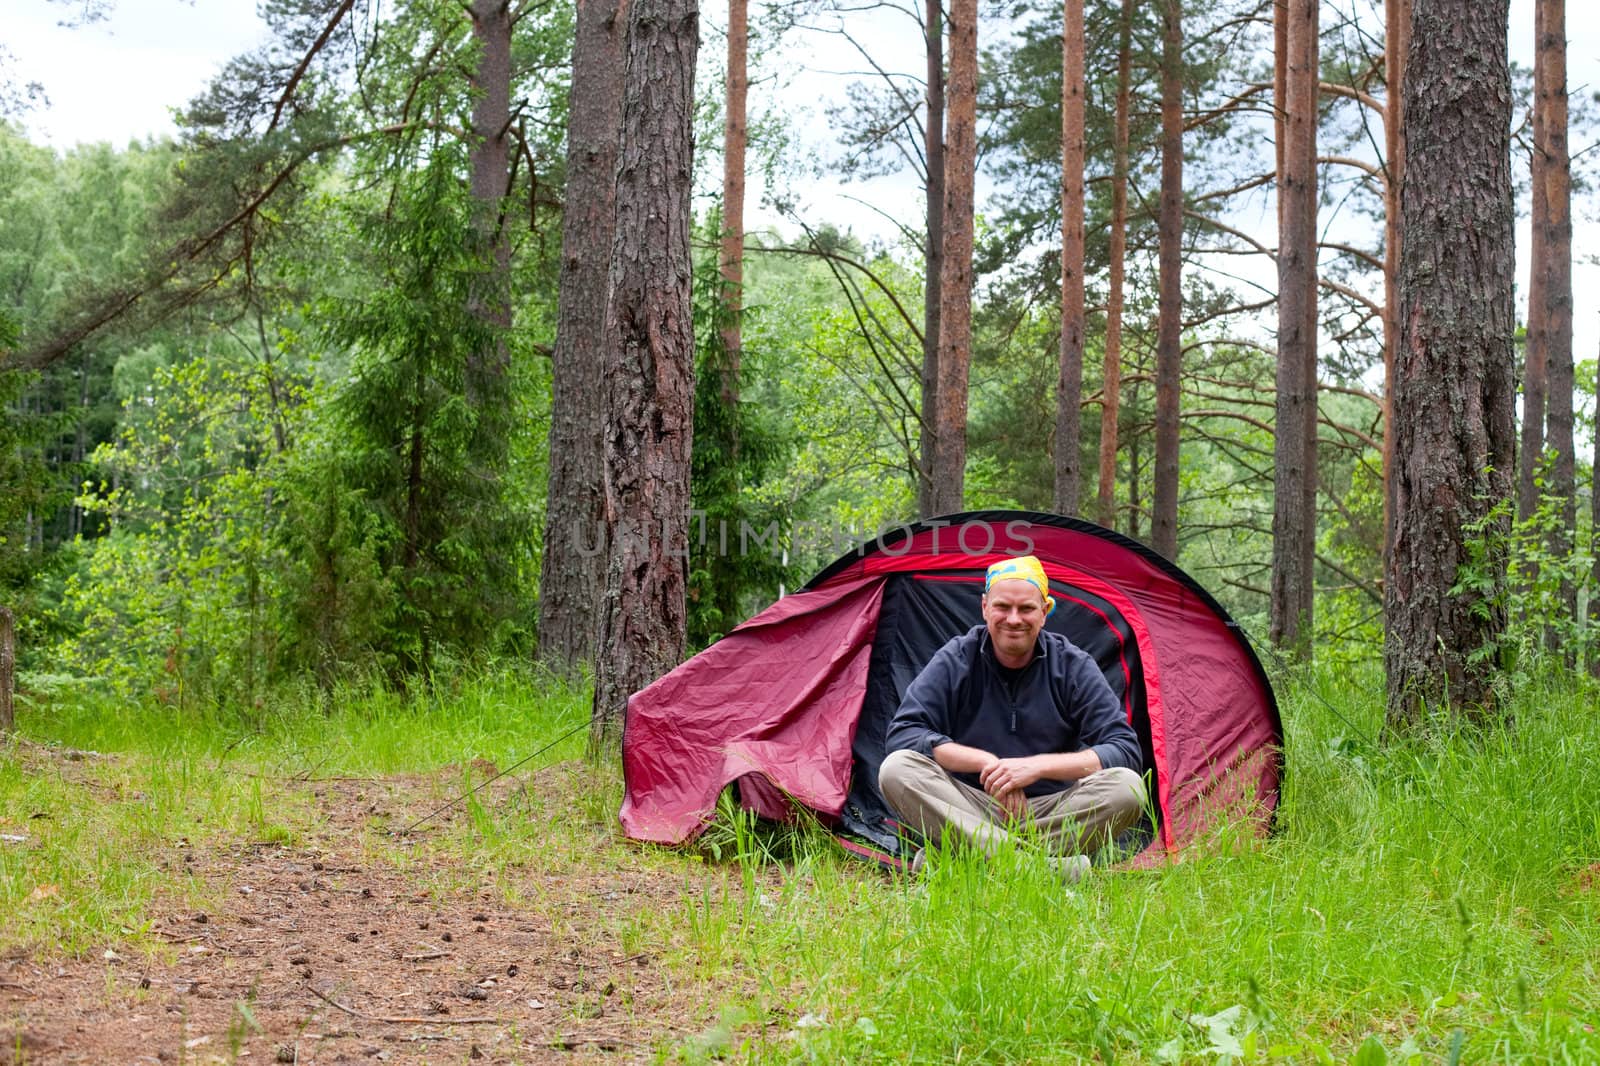 Cheerful tourist sitting in red tent in a forest